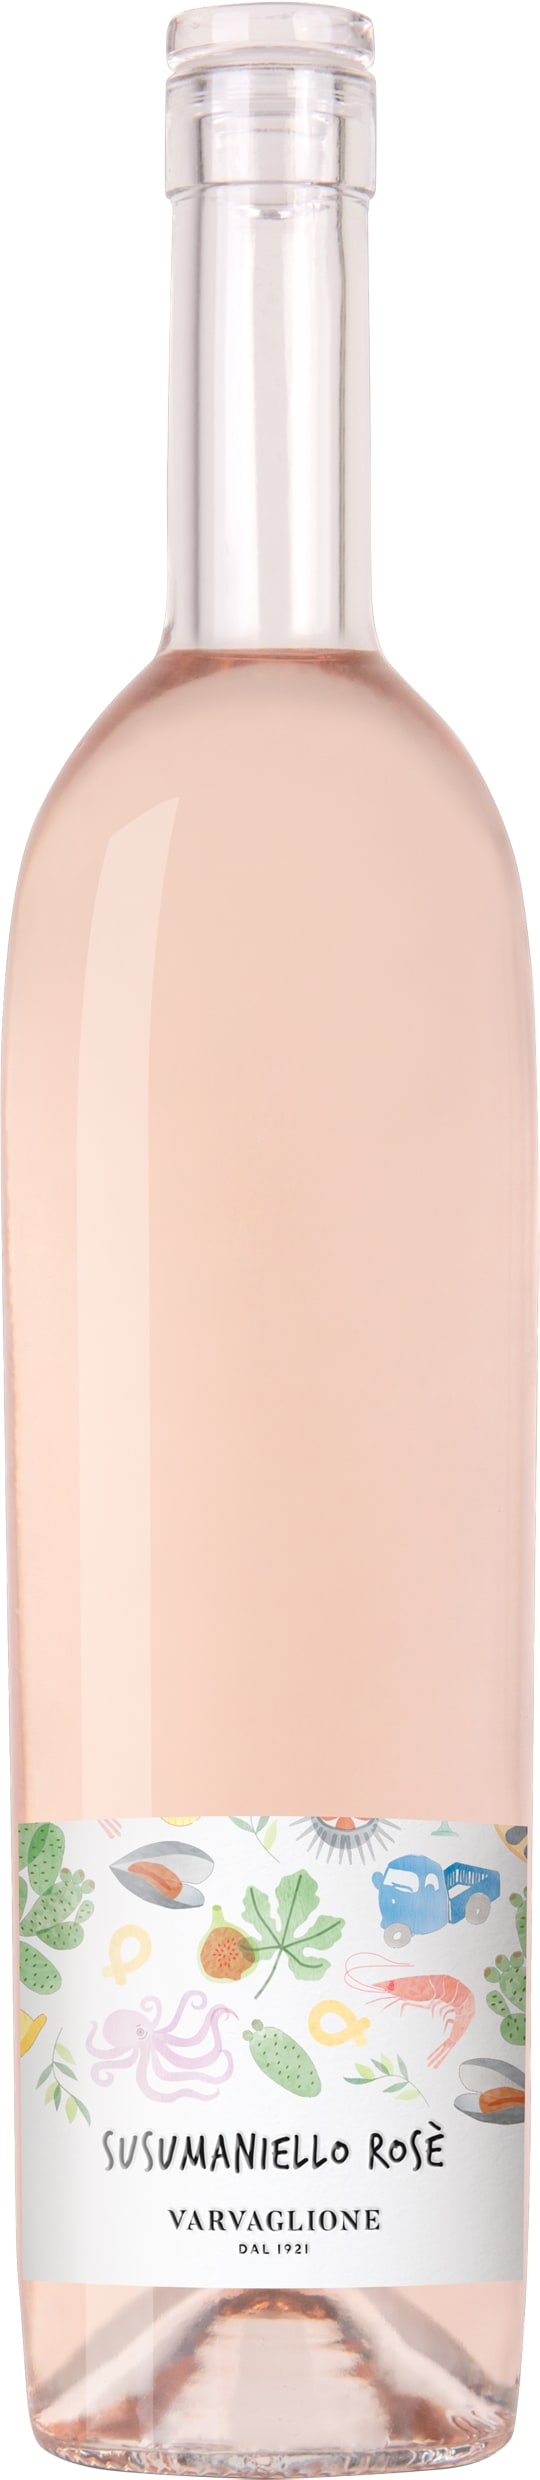 Varvaglione Susumaniello Rose del Salento IGP 2022 75cl - Buy Varvaglione Wines from GREAT WINES DIRECT wine shop